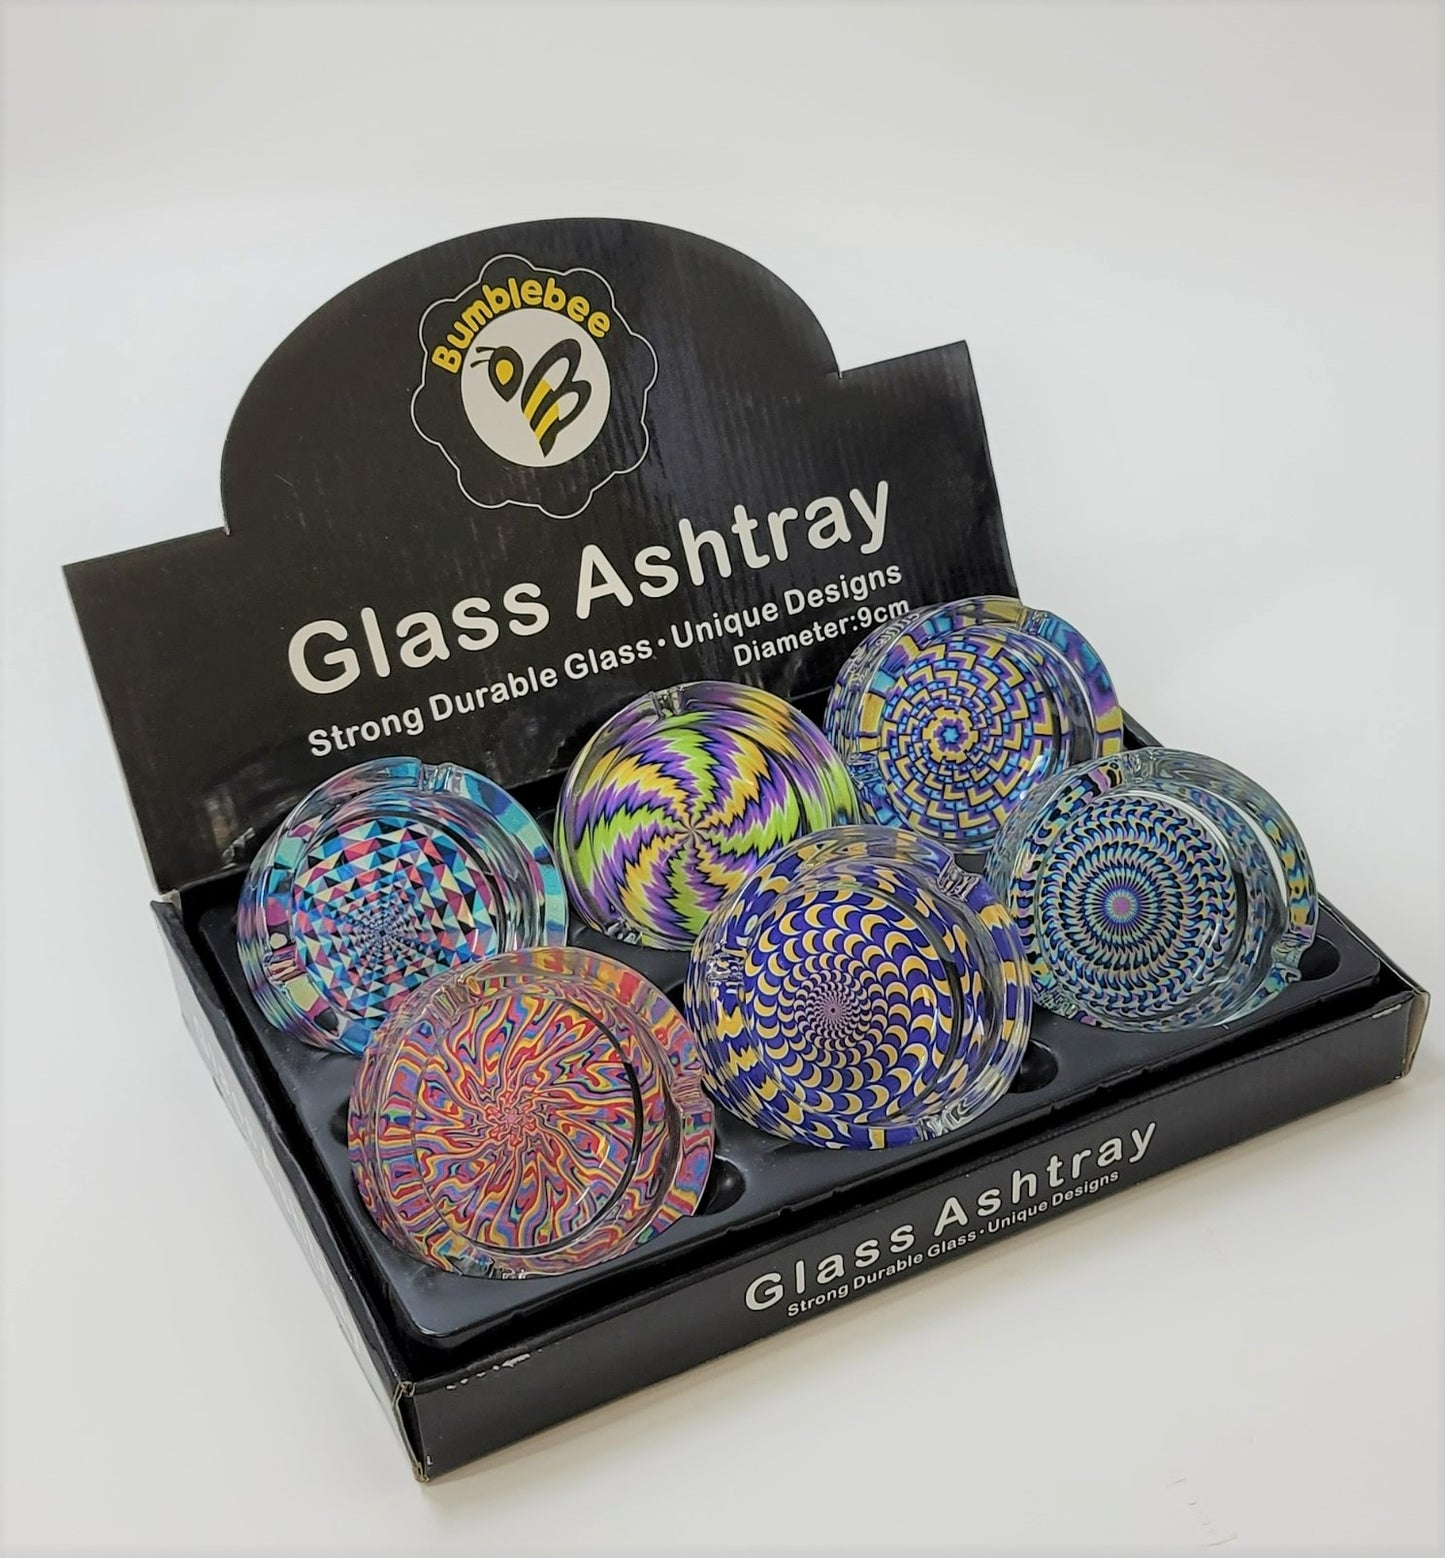 90MM Durable Glass Ashtrays - Pack of 6